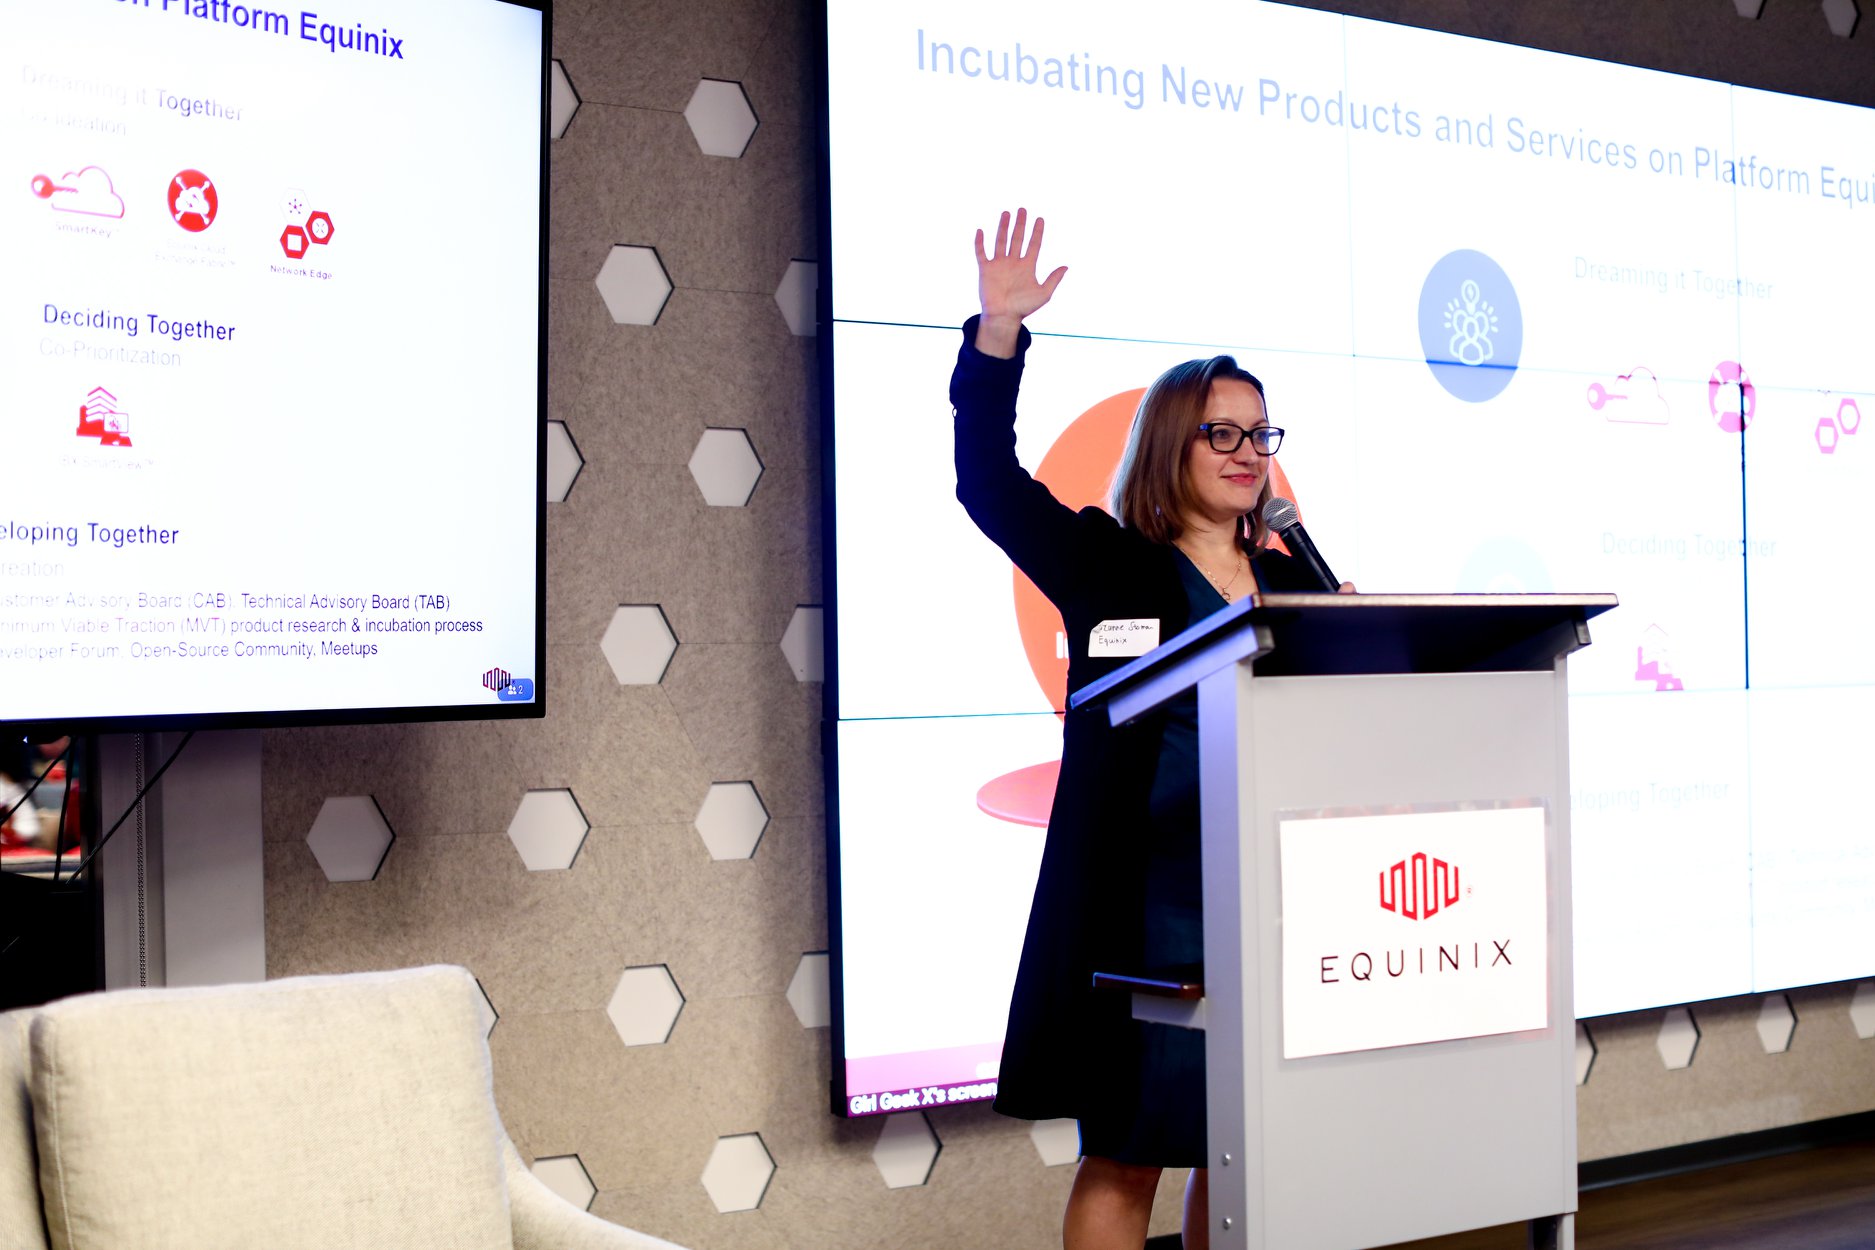 Director of Applications Rozanne Stoman gives talk on “finding tech: delivering innovative solutions” at Equinix Girl Geek Dinner 2019